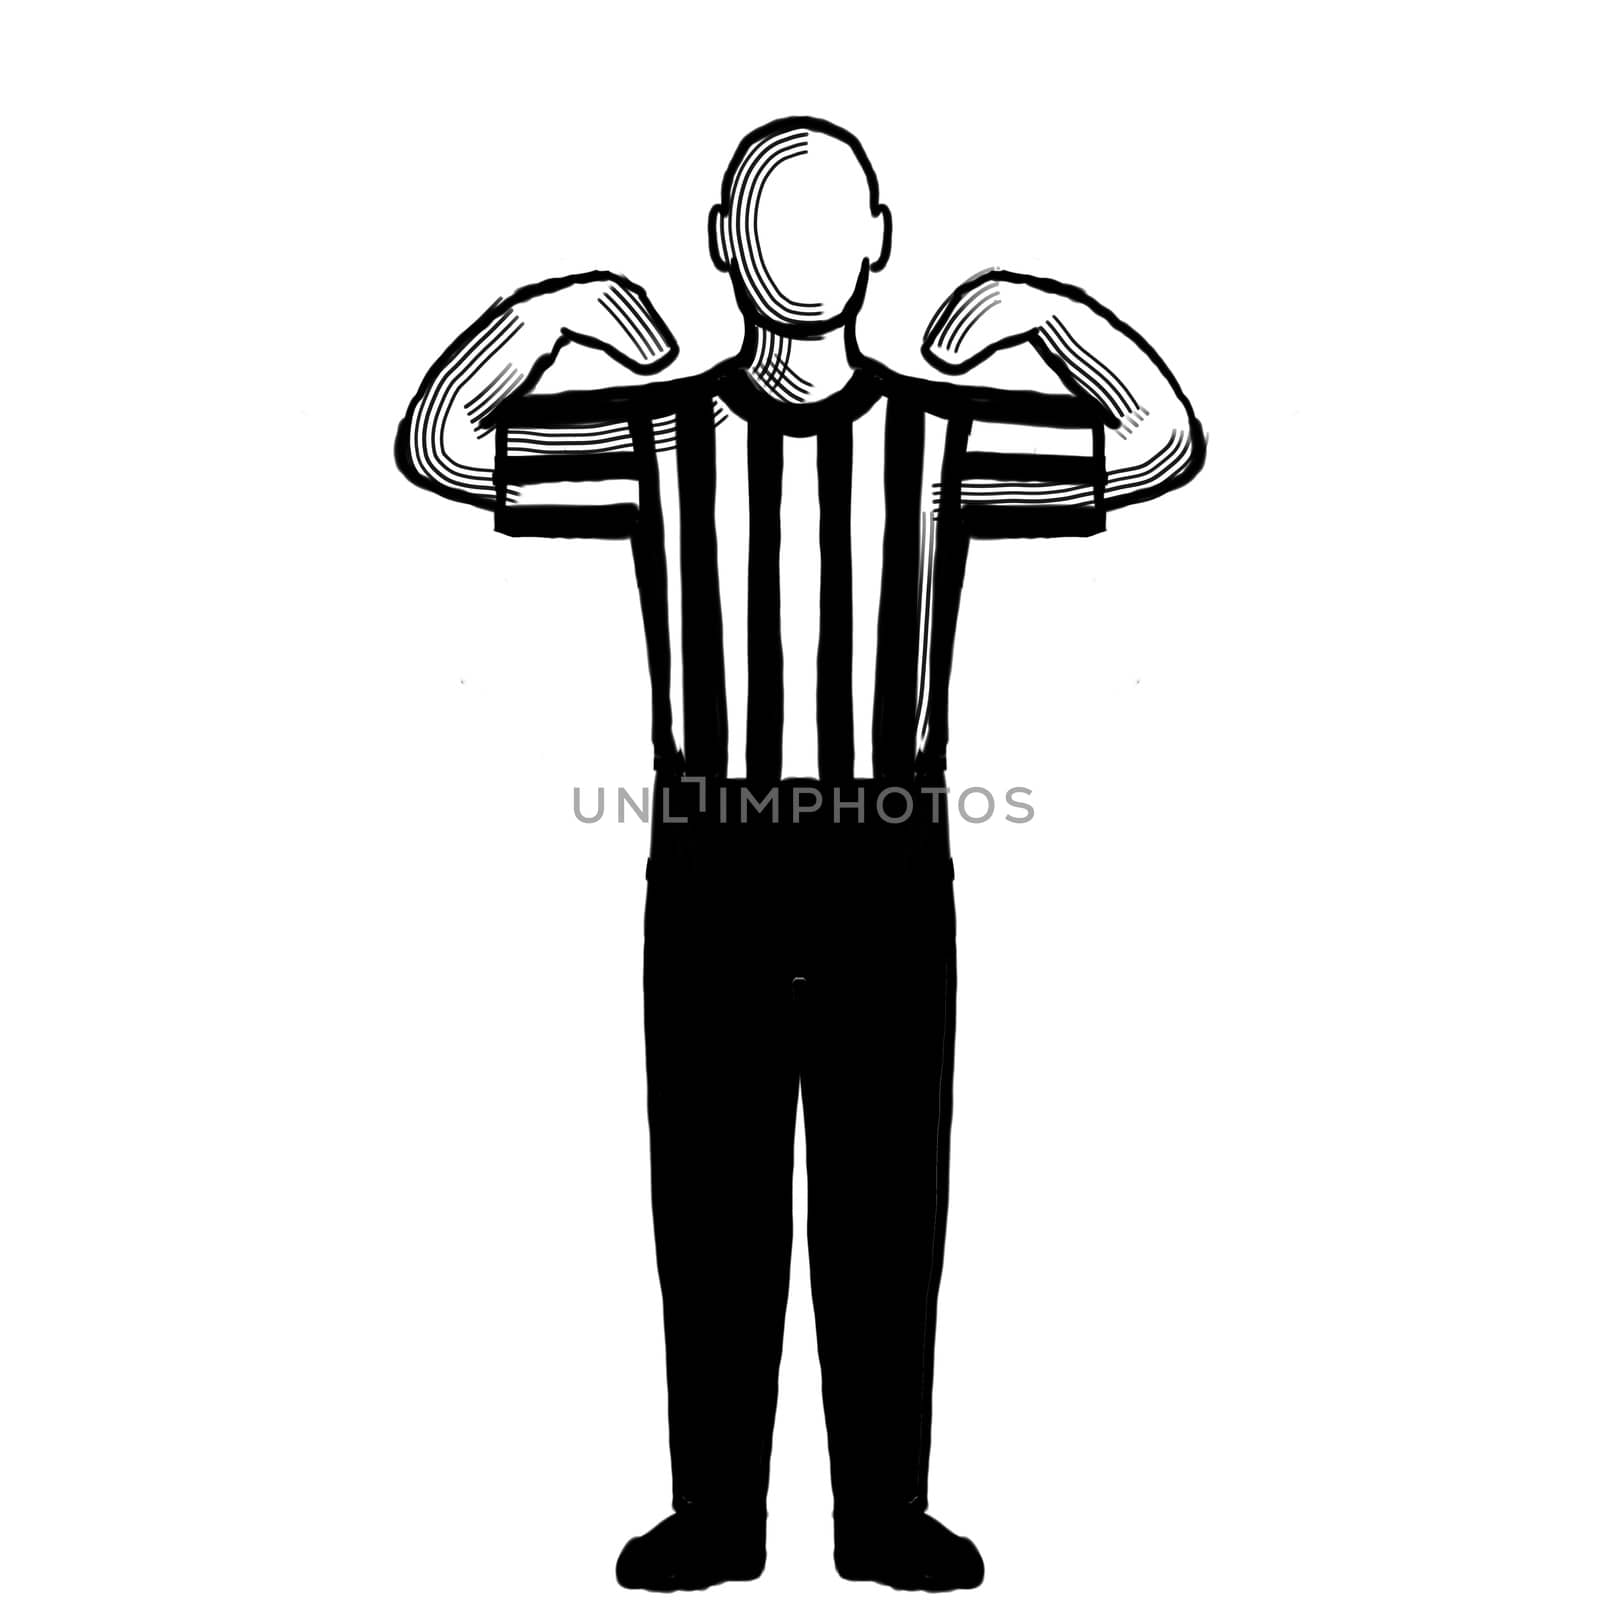 Basketball Referee 30-second time-out Hand Signal Retro Black and White by patrimonio